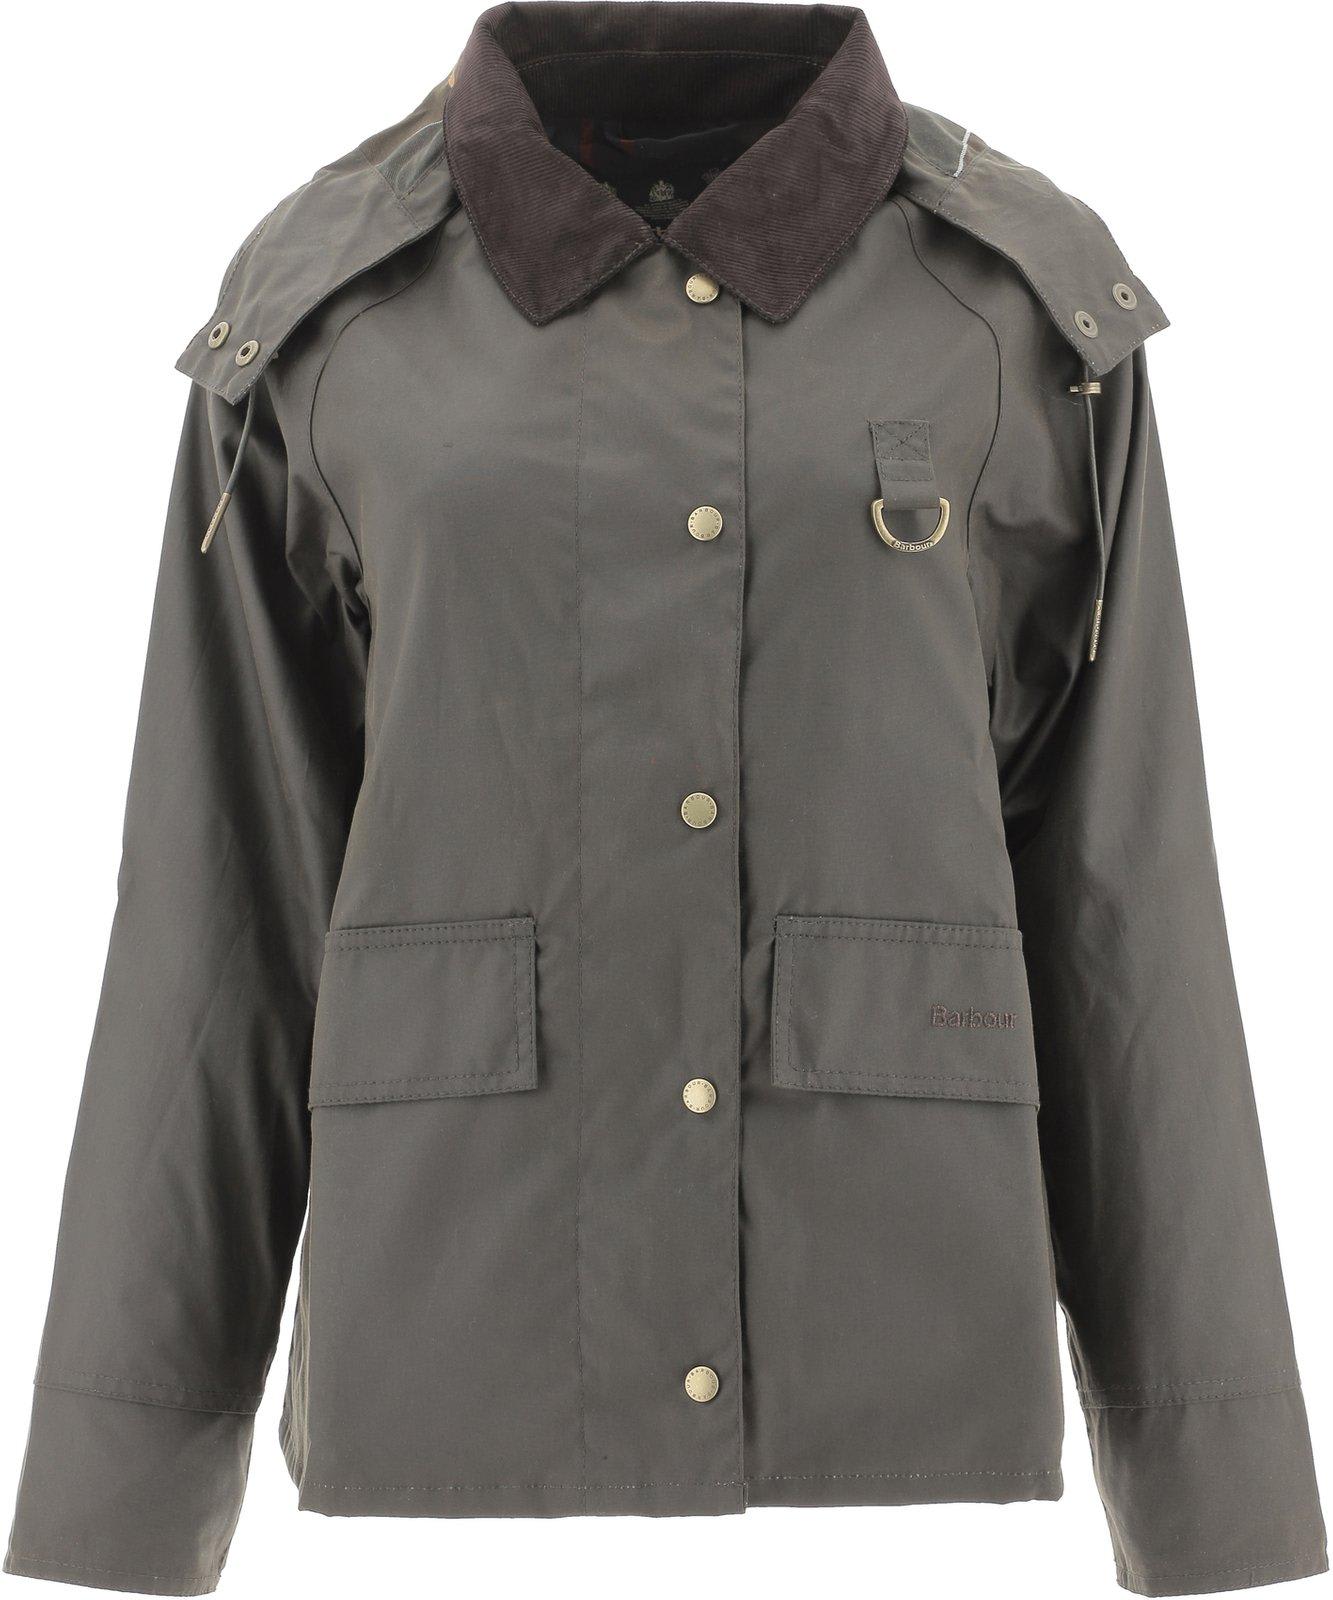 Barbour Avon Waxed Jacket